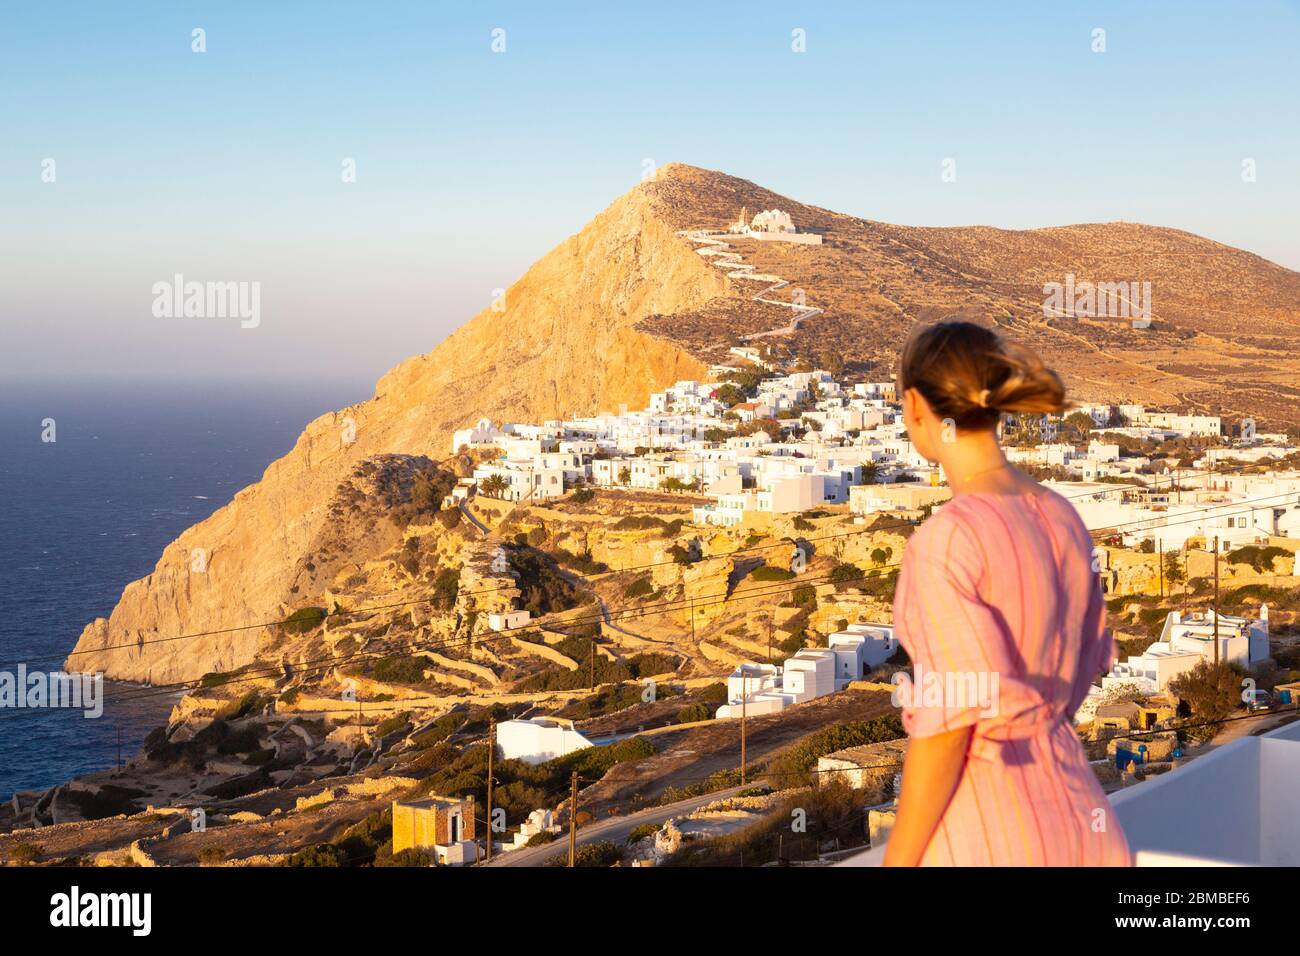 A girl looking out over the Folegandros Municipality at sunset, Folegandros, Cyclades Islands, Greece Stock Photo